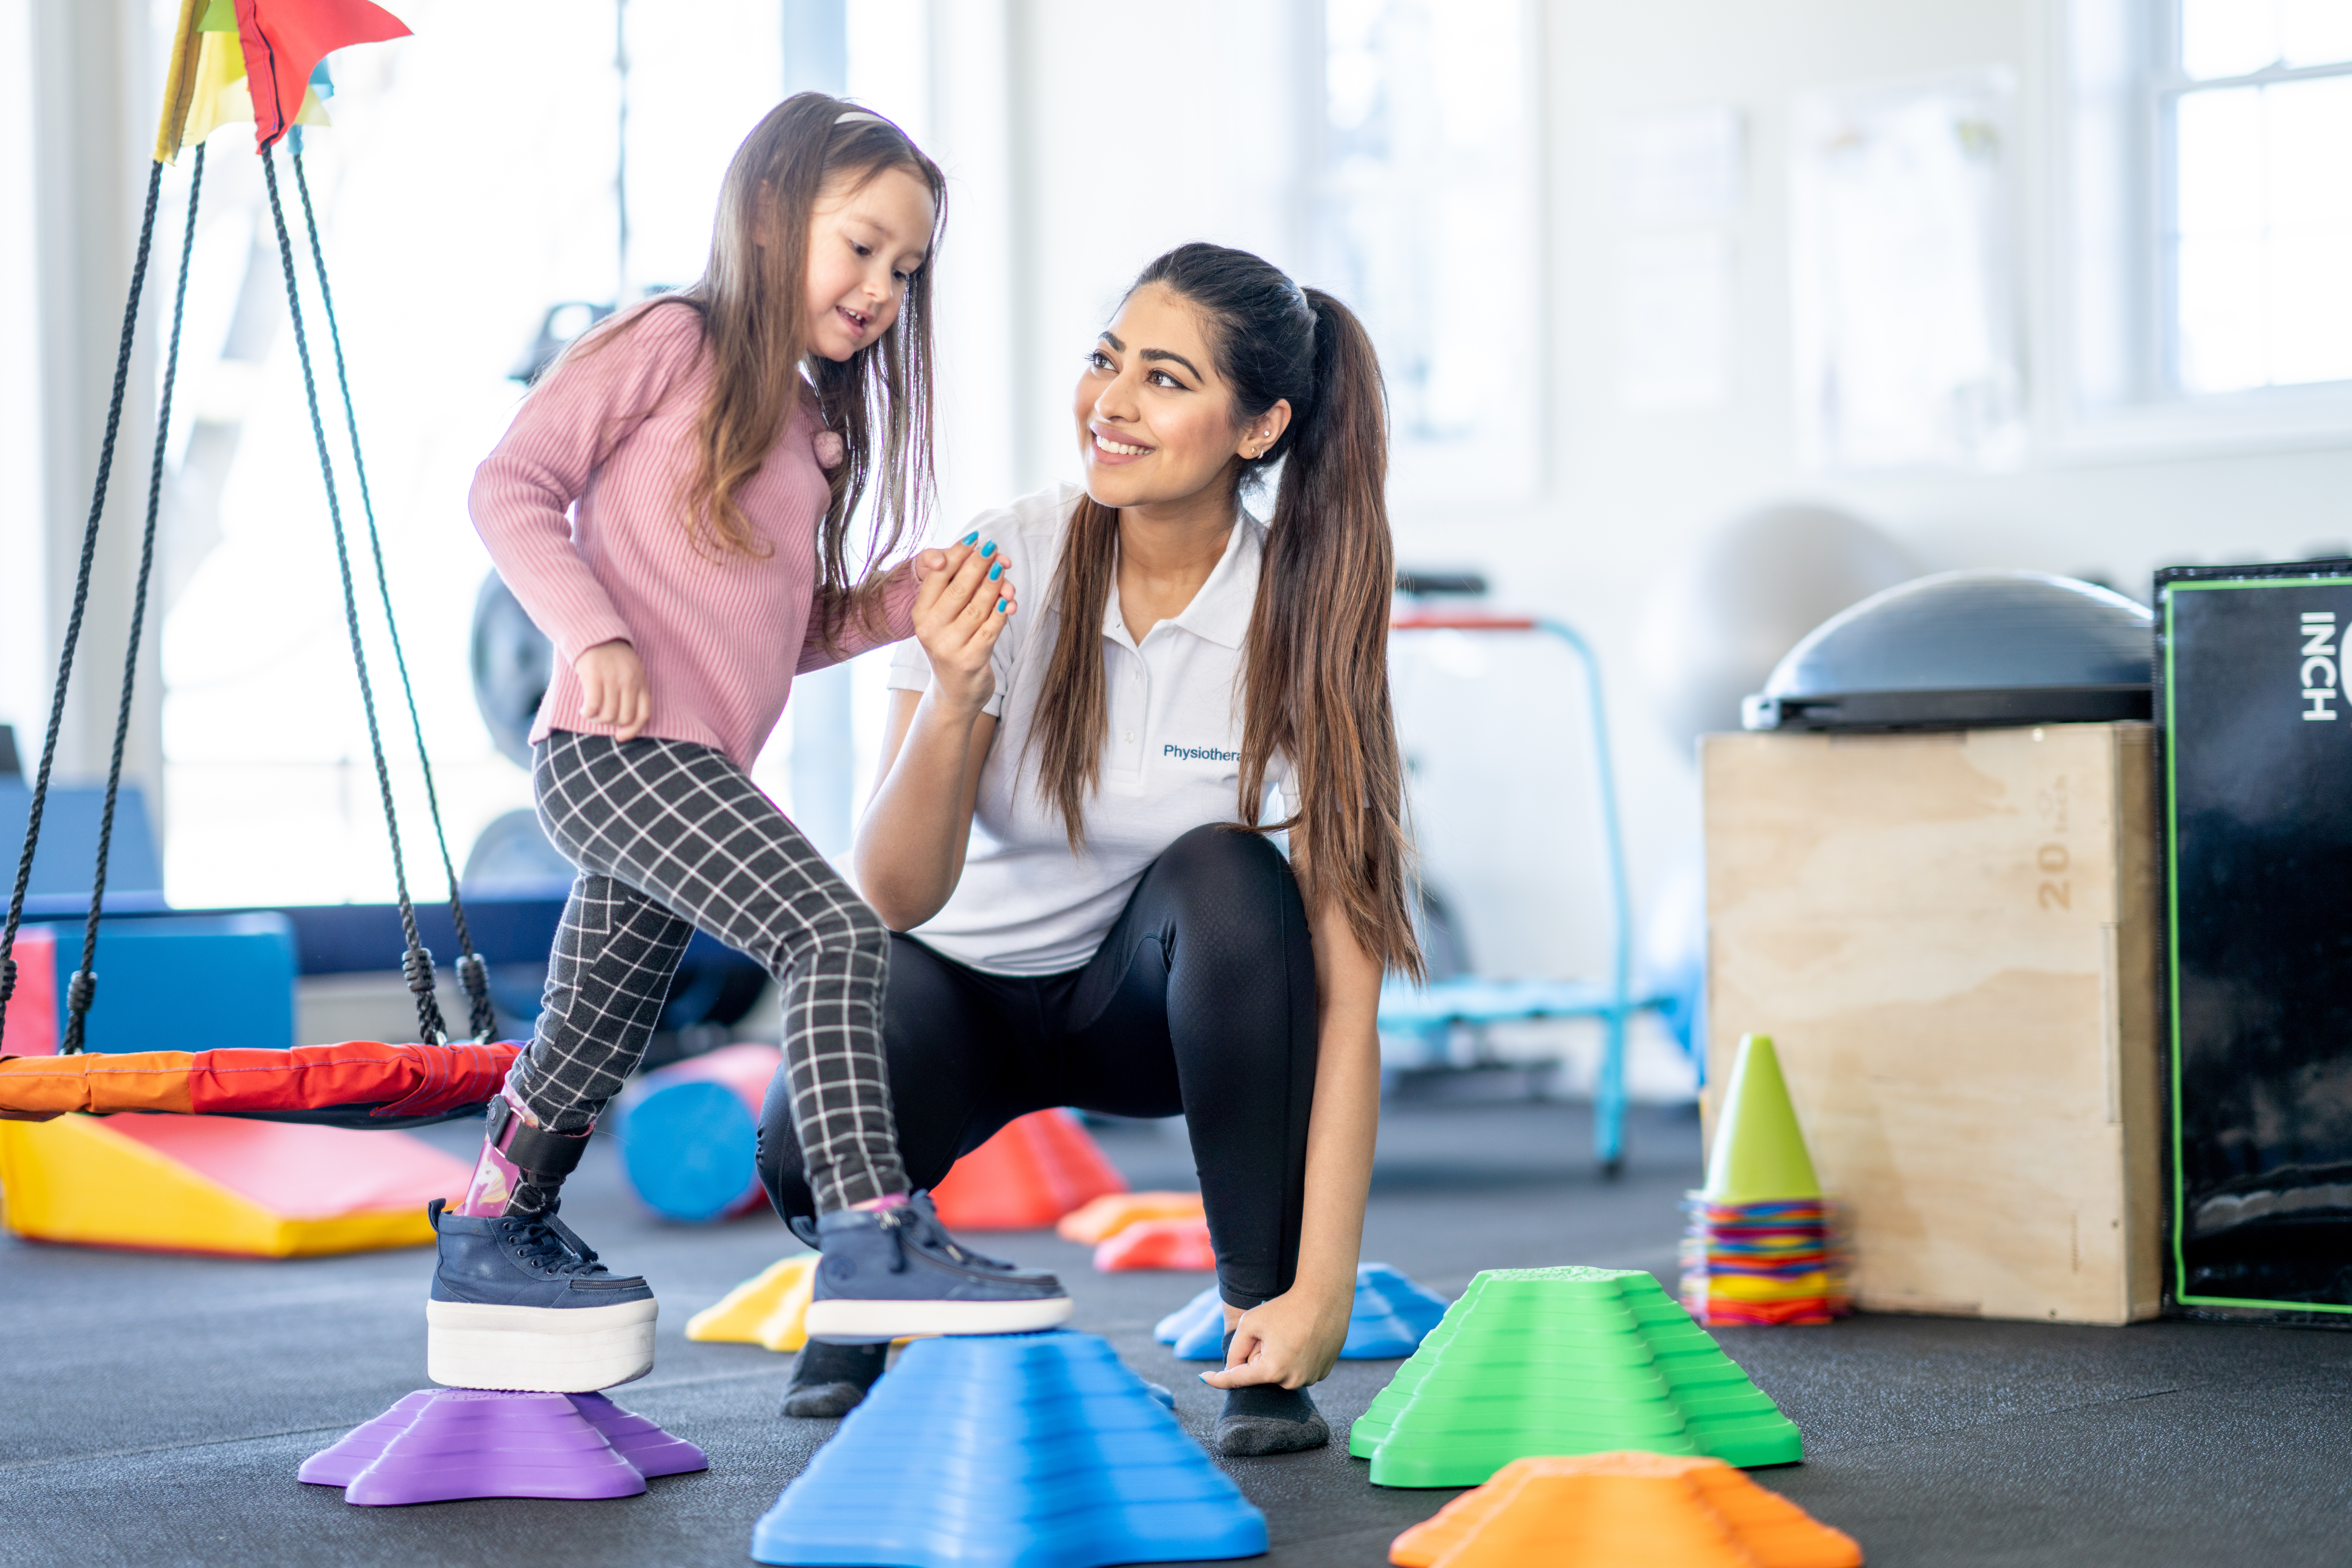 Young girl holding physical therapists hand as she works on her balance with her brace on